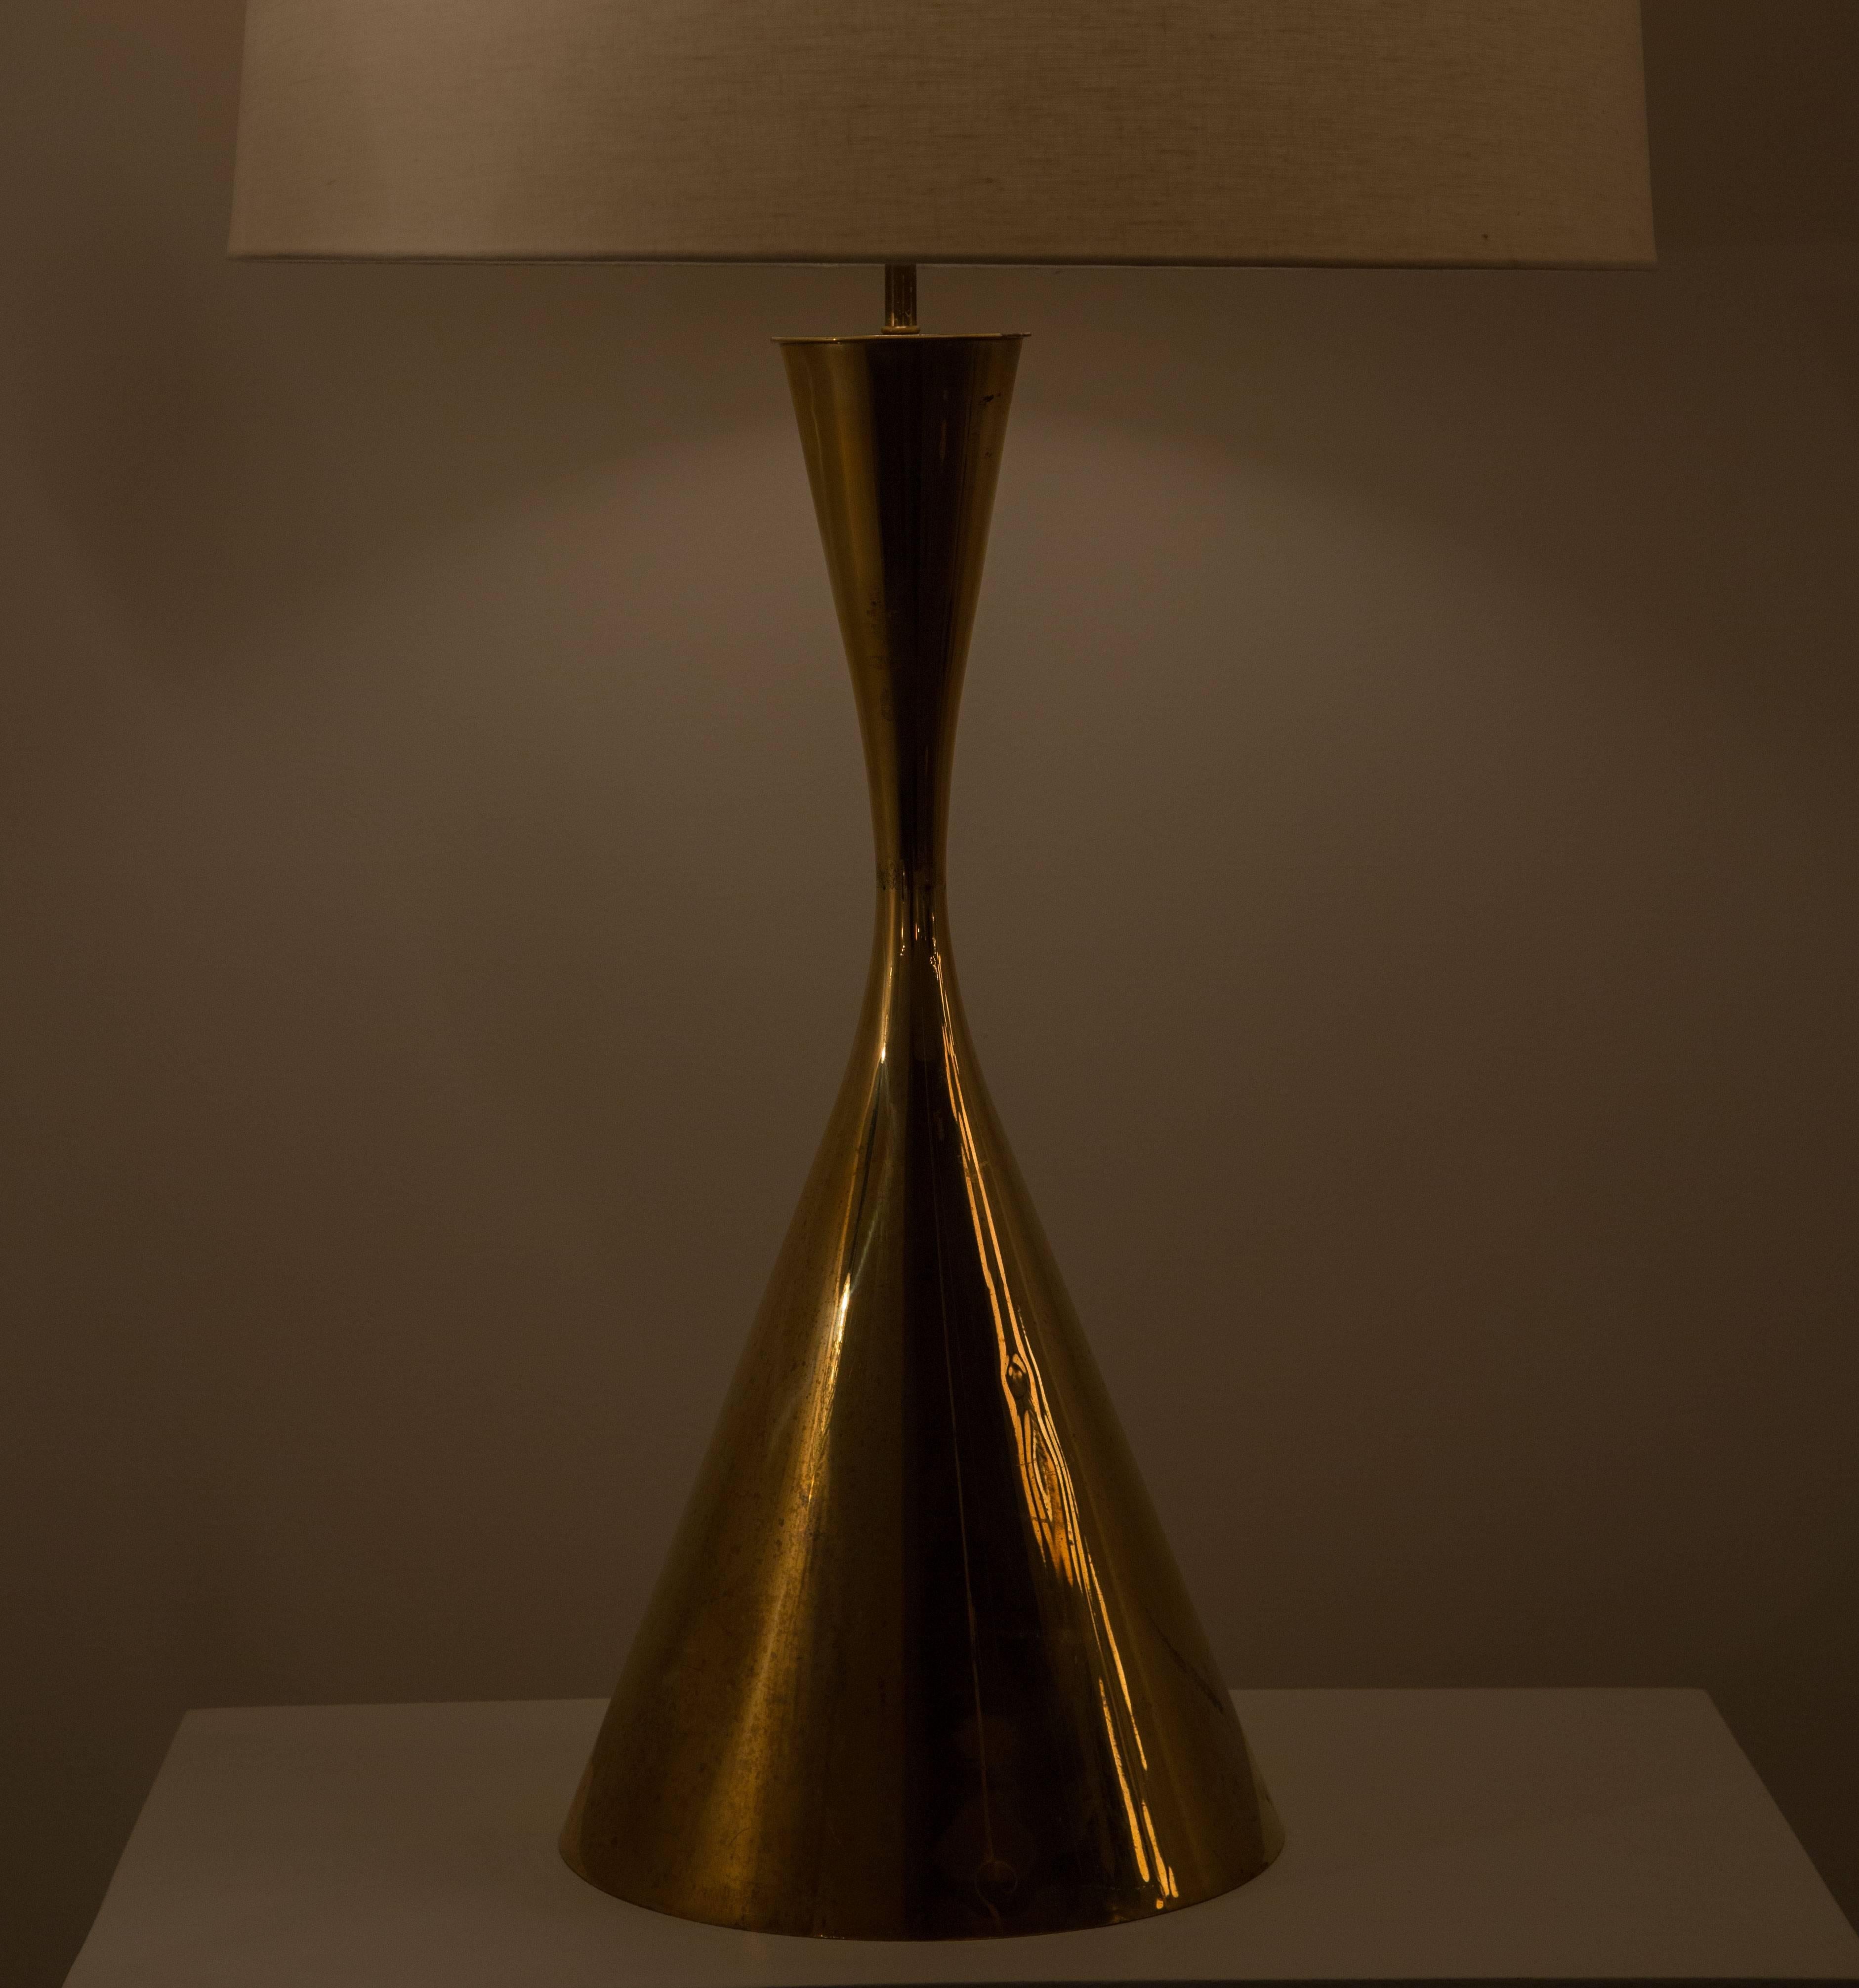 Brass table lamp with glass diffuser by Angelo Lelli for Arredoluce.